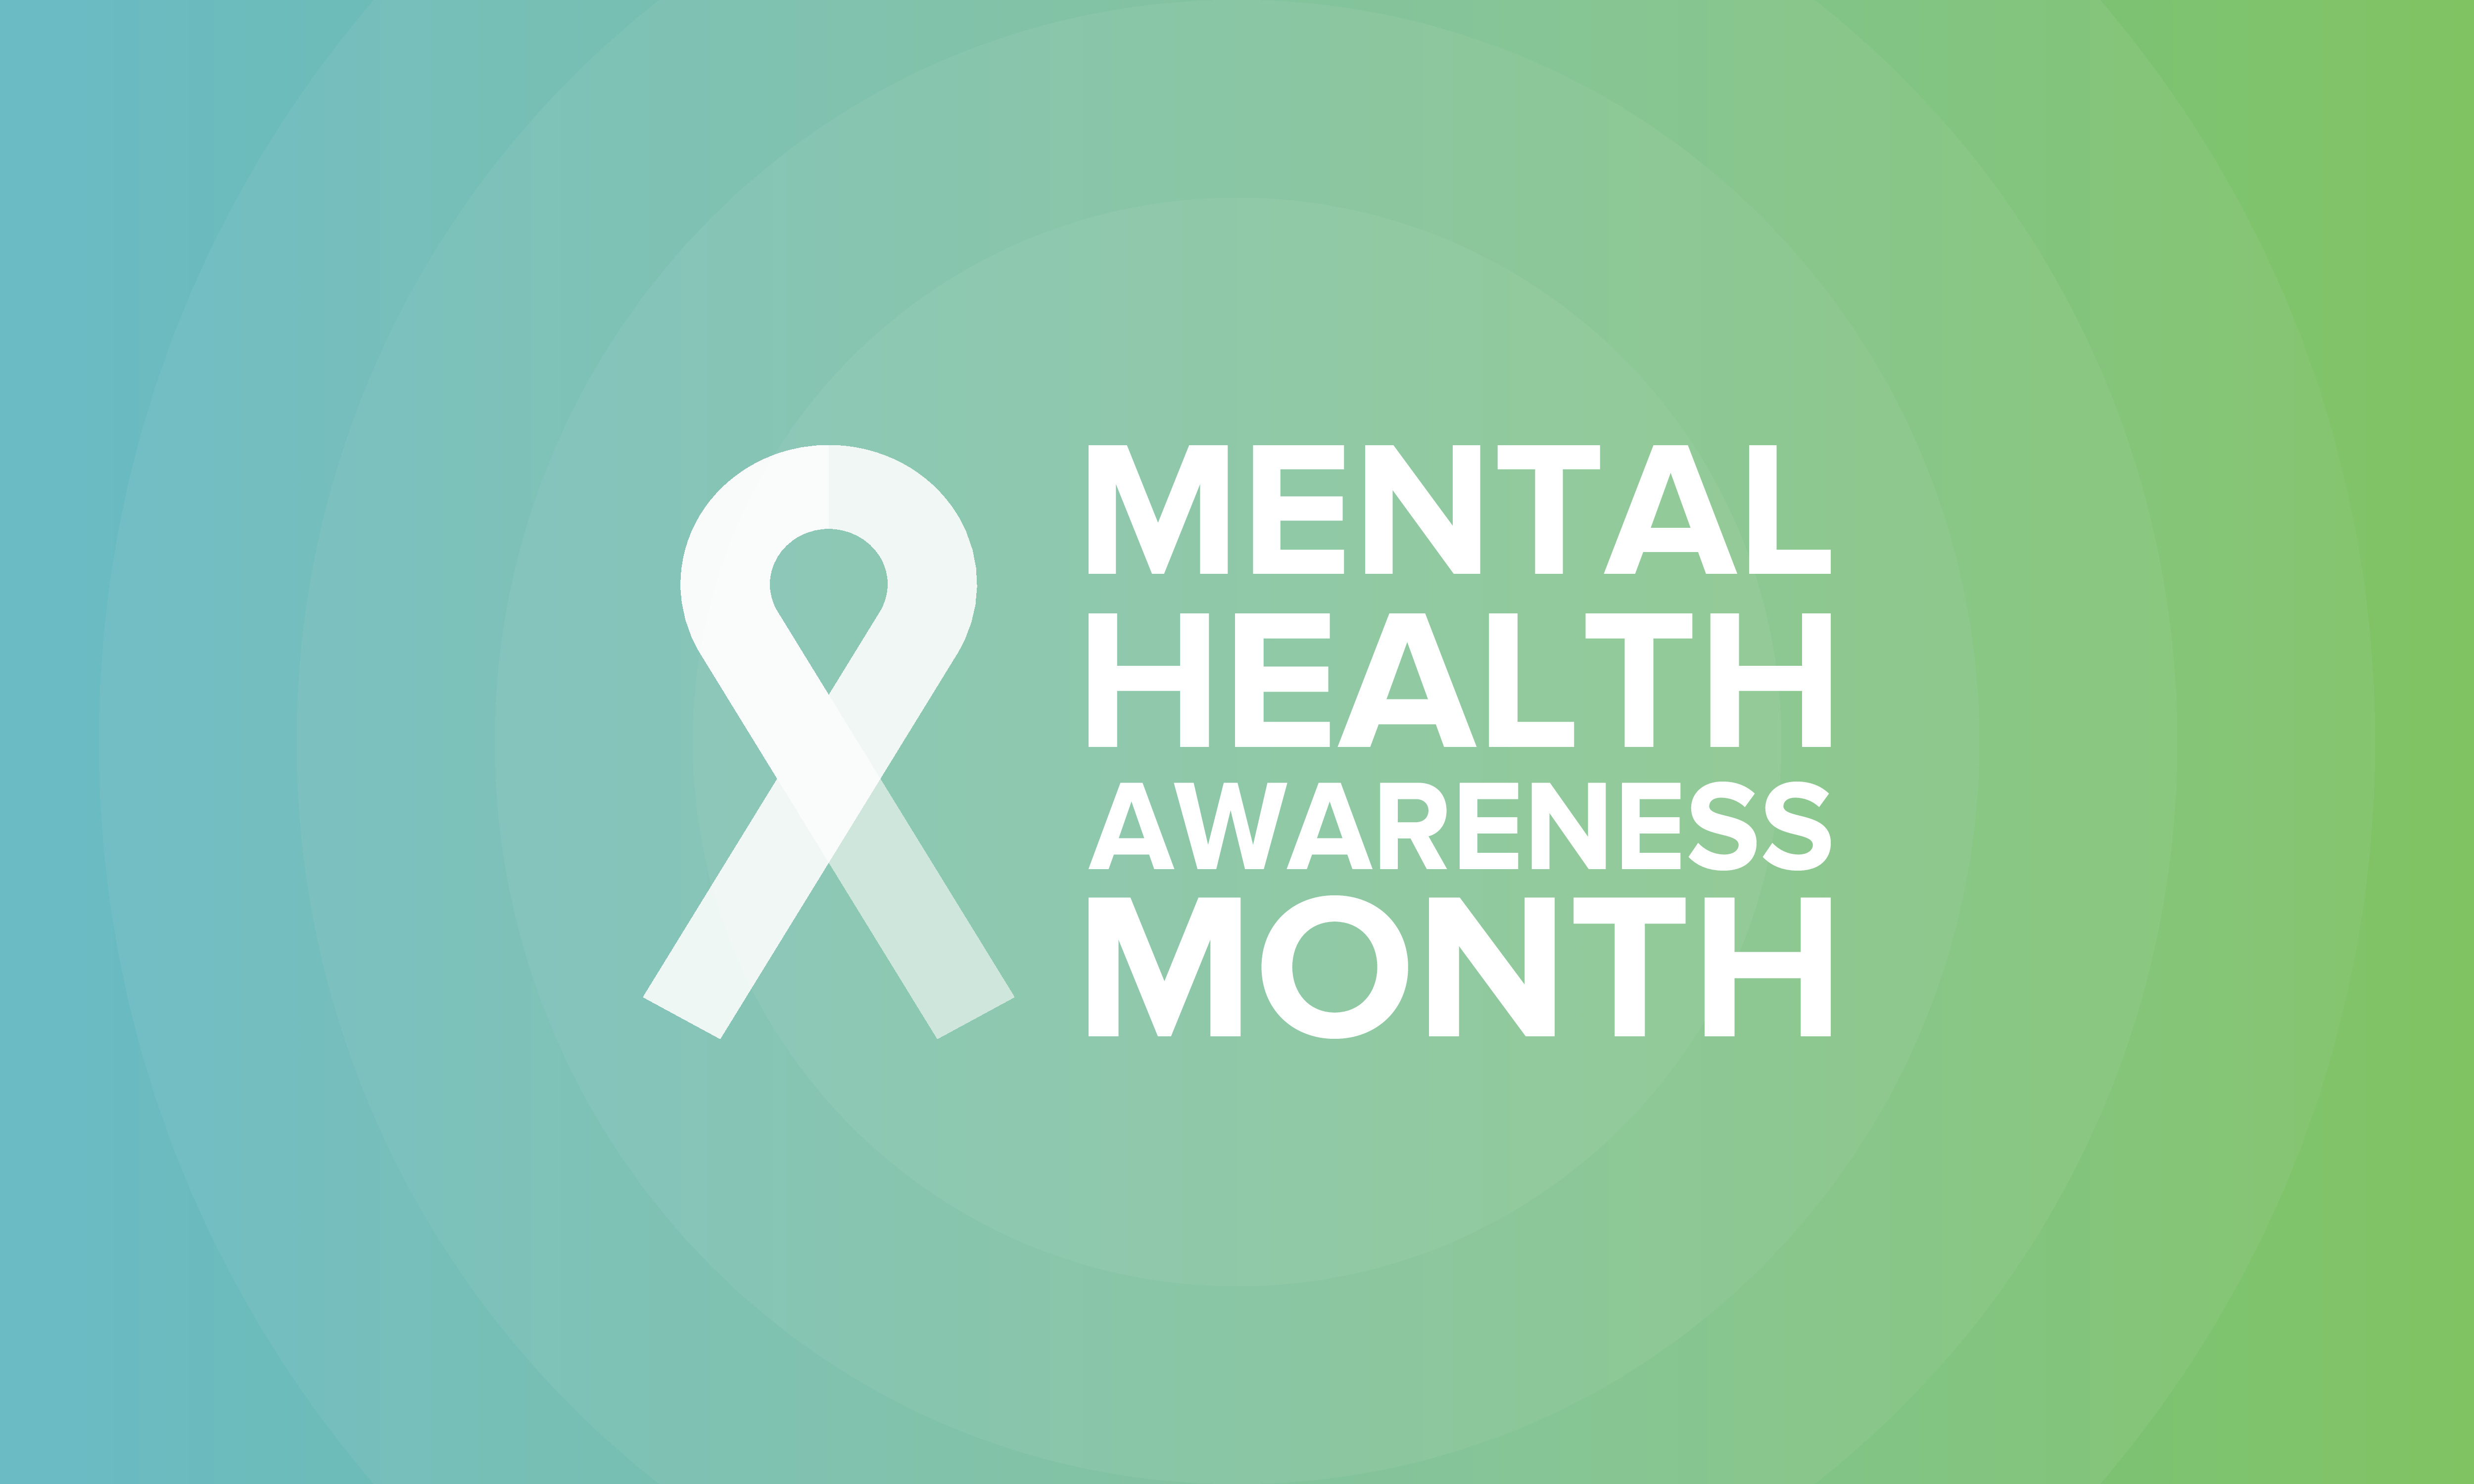 Mental Health Awareness Month in May. Annual campaign in United States